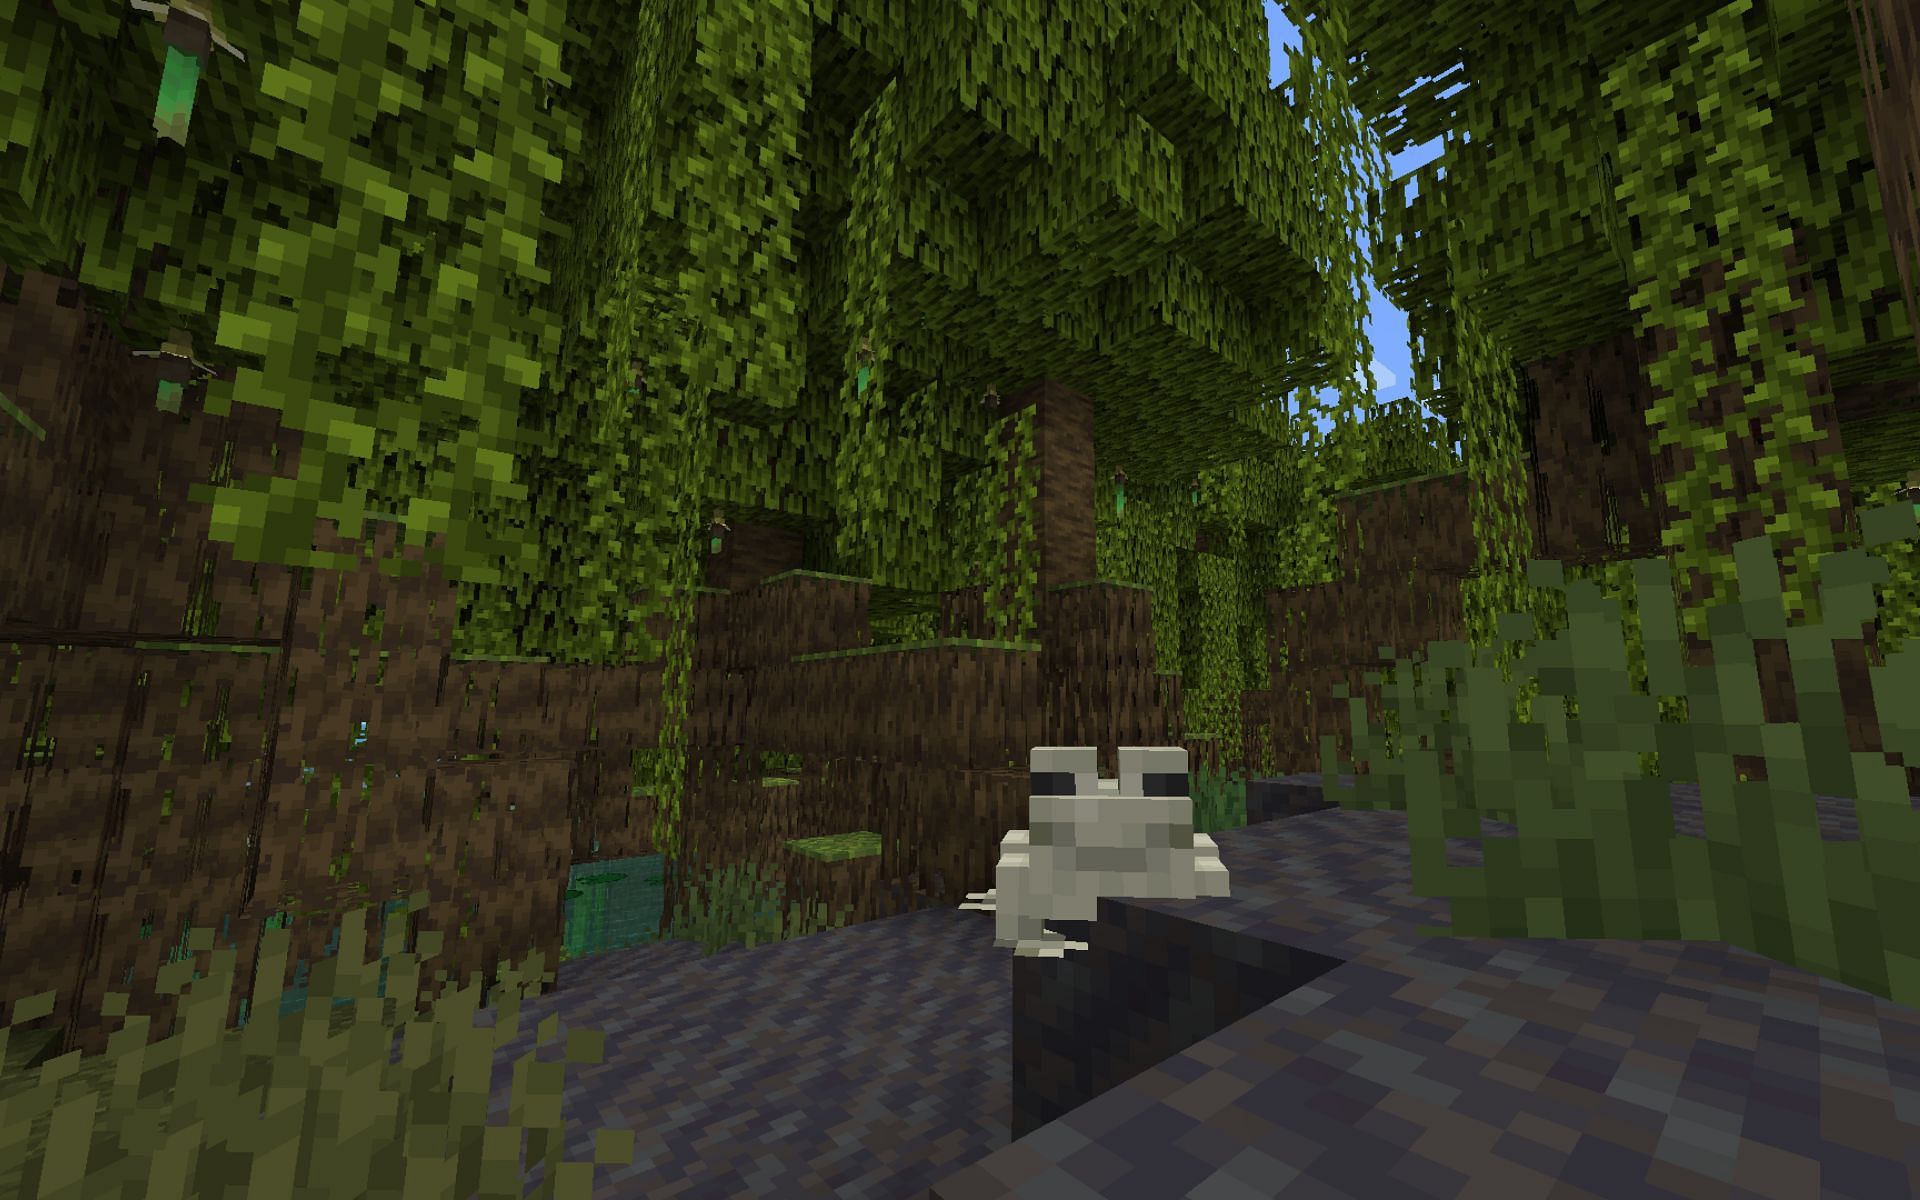 A Mangrove Swamp Biome as pictured in-game (Image via Minecraft 1.19 pre-release)